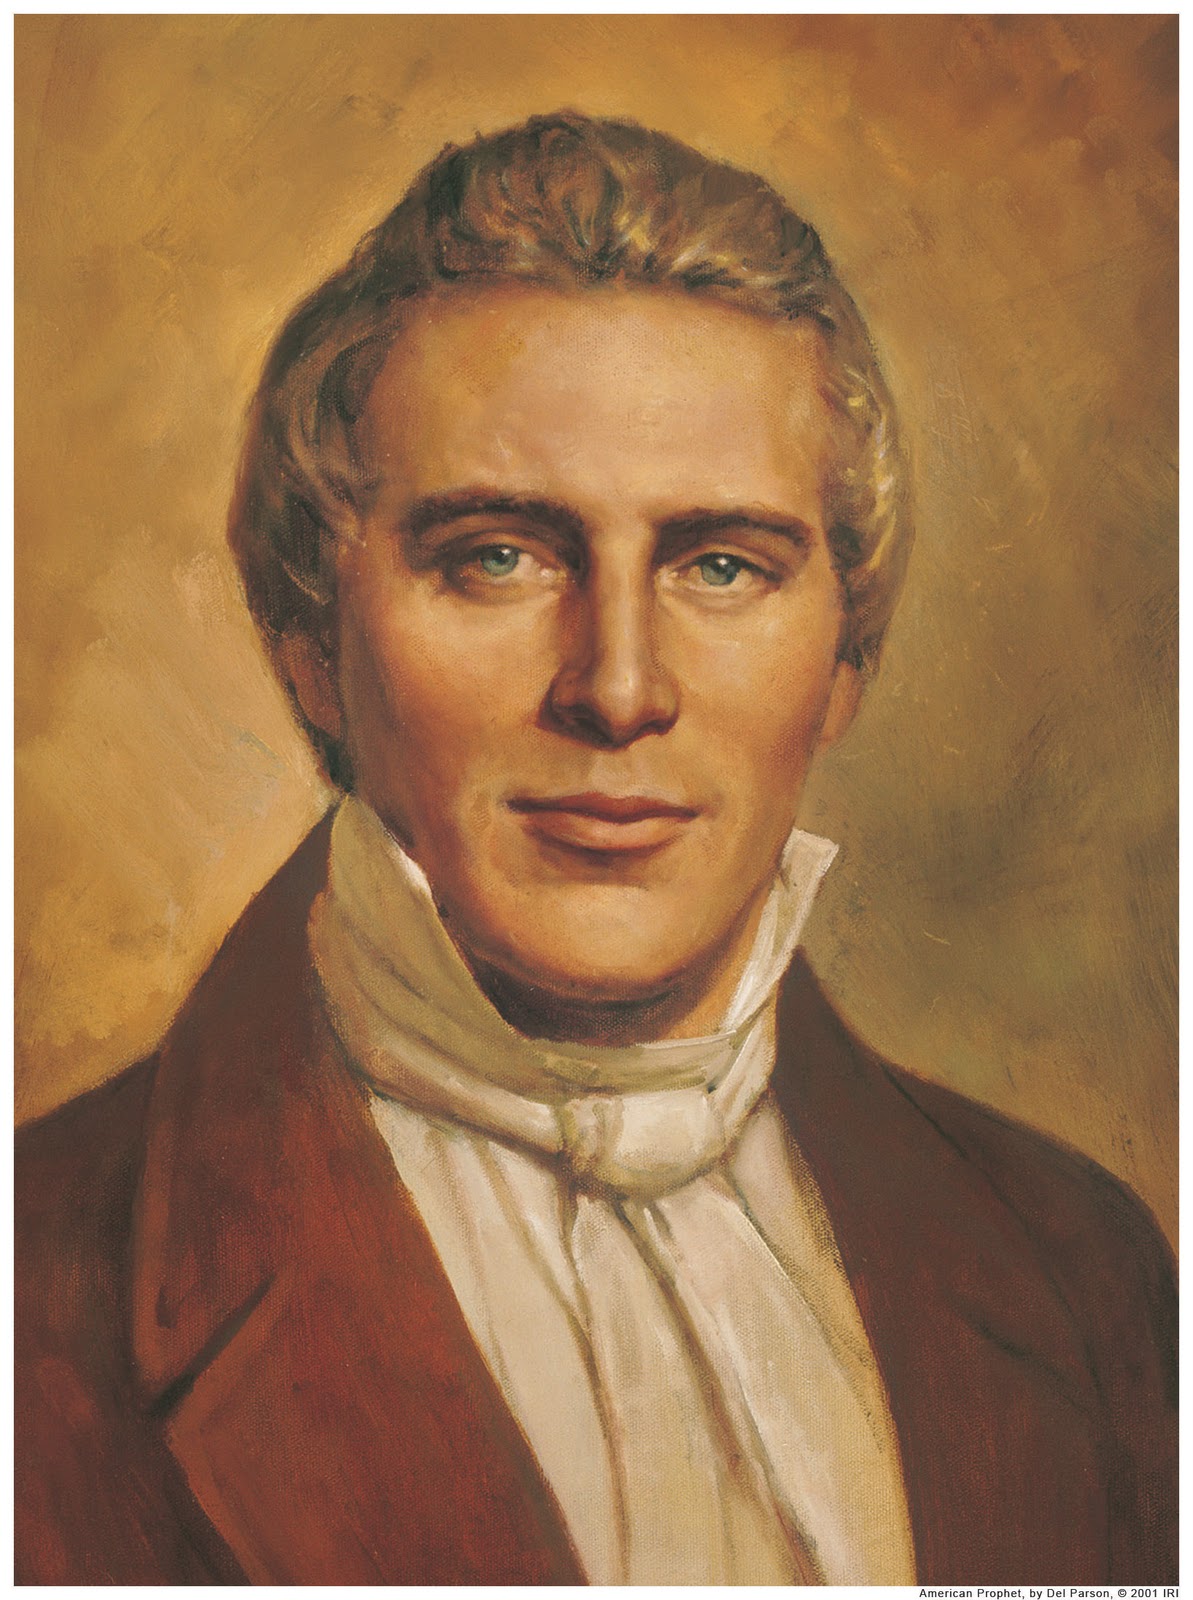 A painting of Joseph Smith. He wears a red coat, a white shirt with the collar up, and a white cravat. He has blond hair, which is combed back, and wears a slight smile. His features are strong and firm.